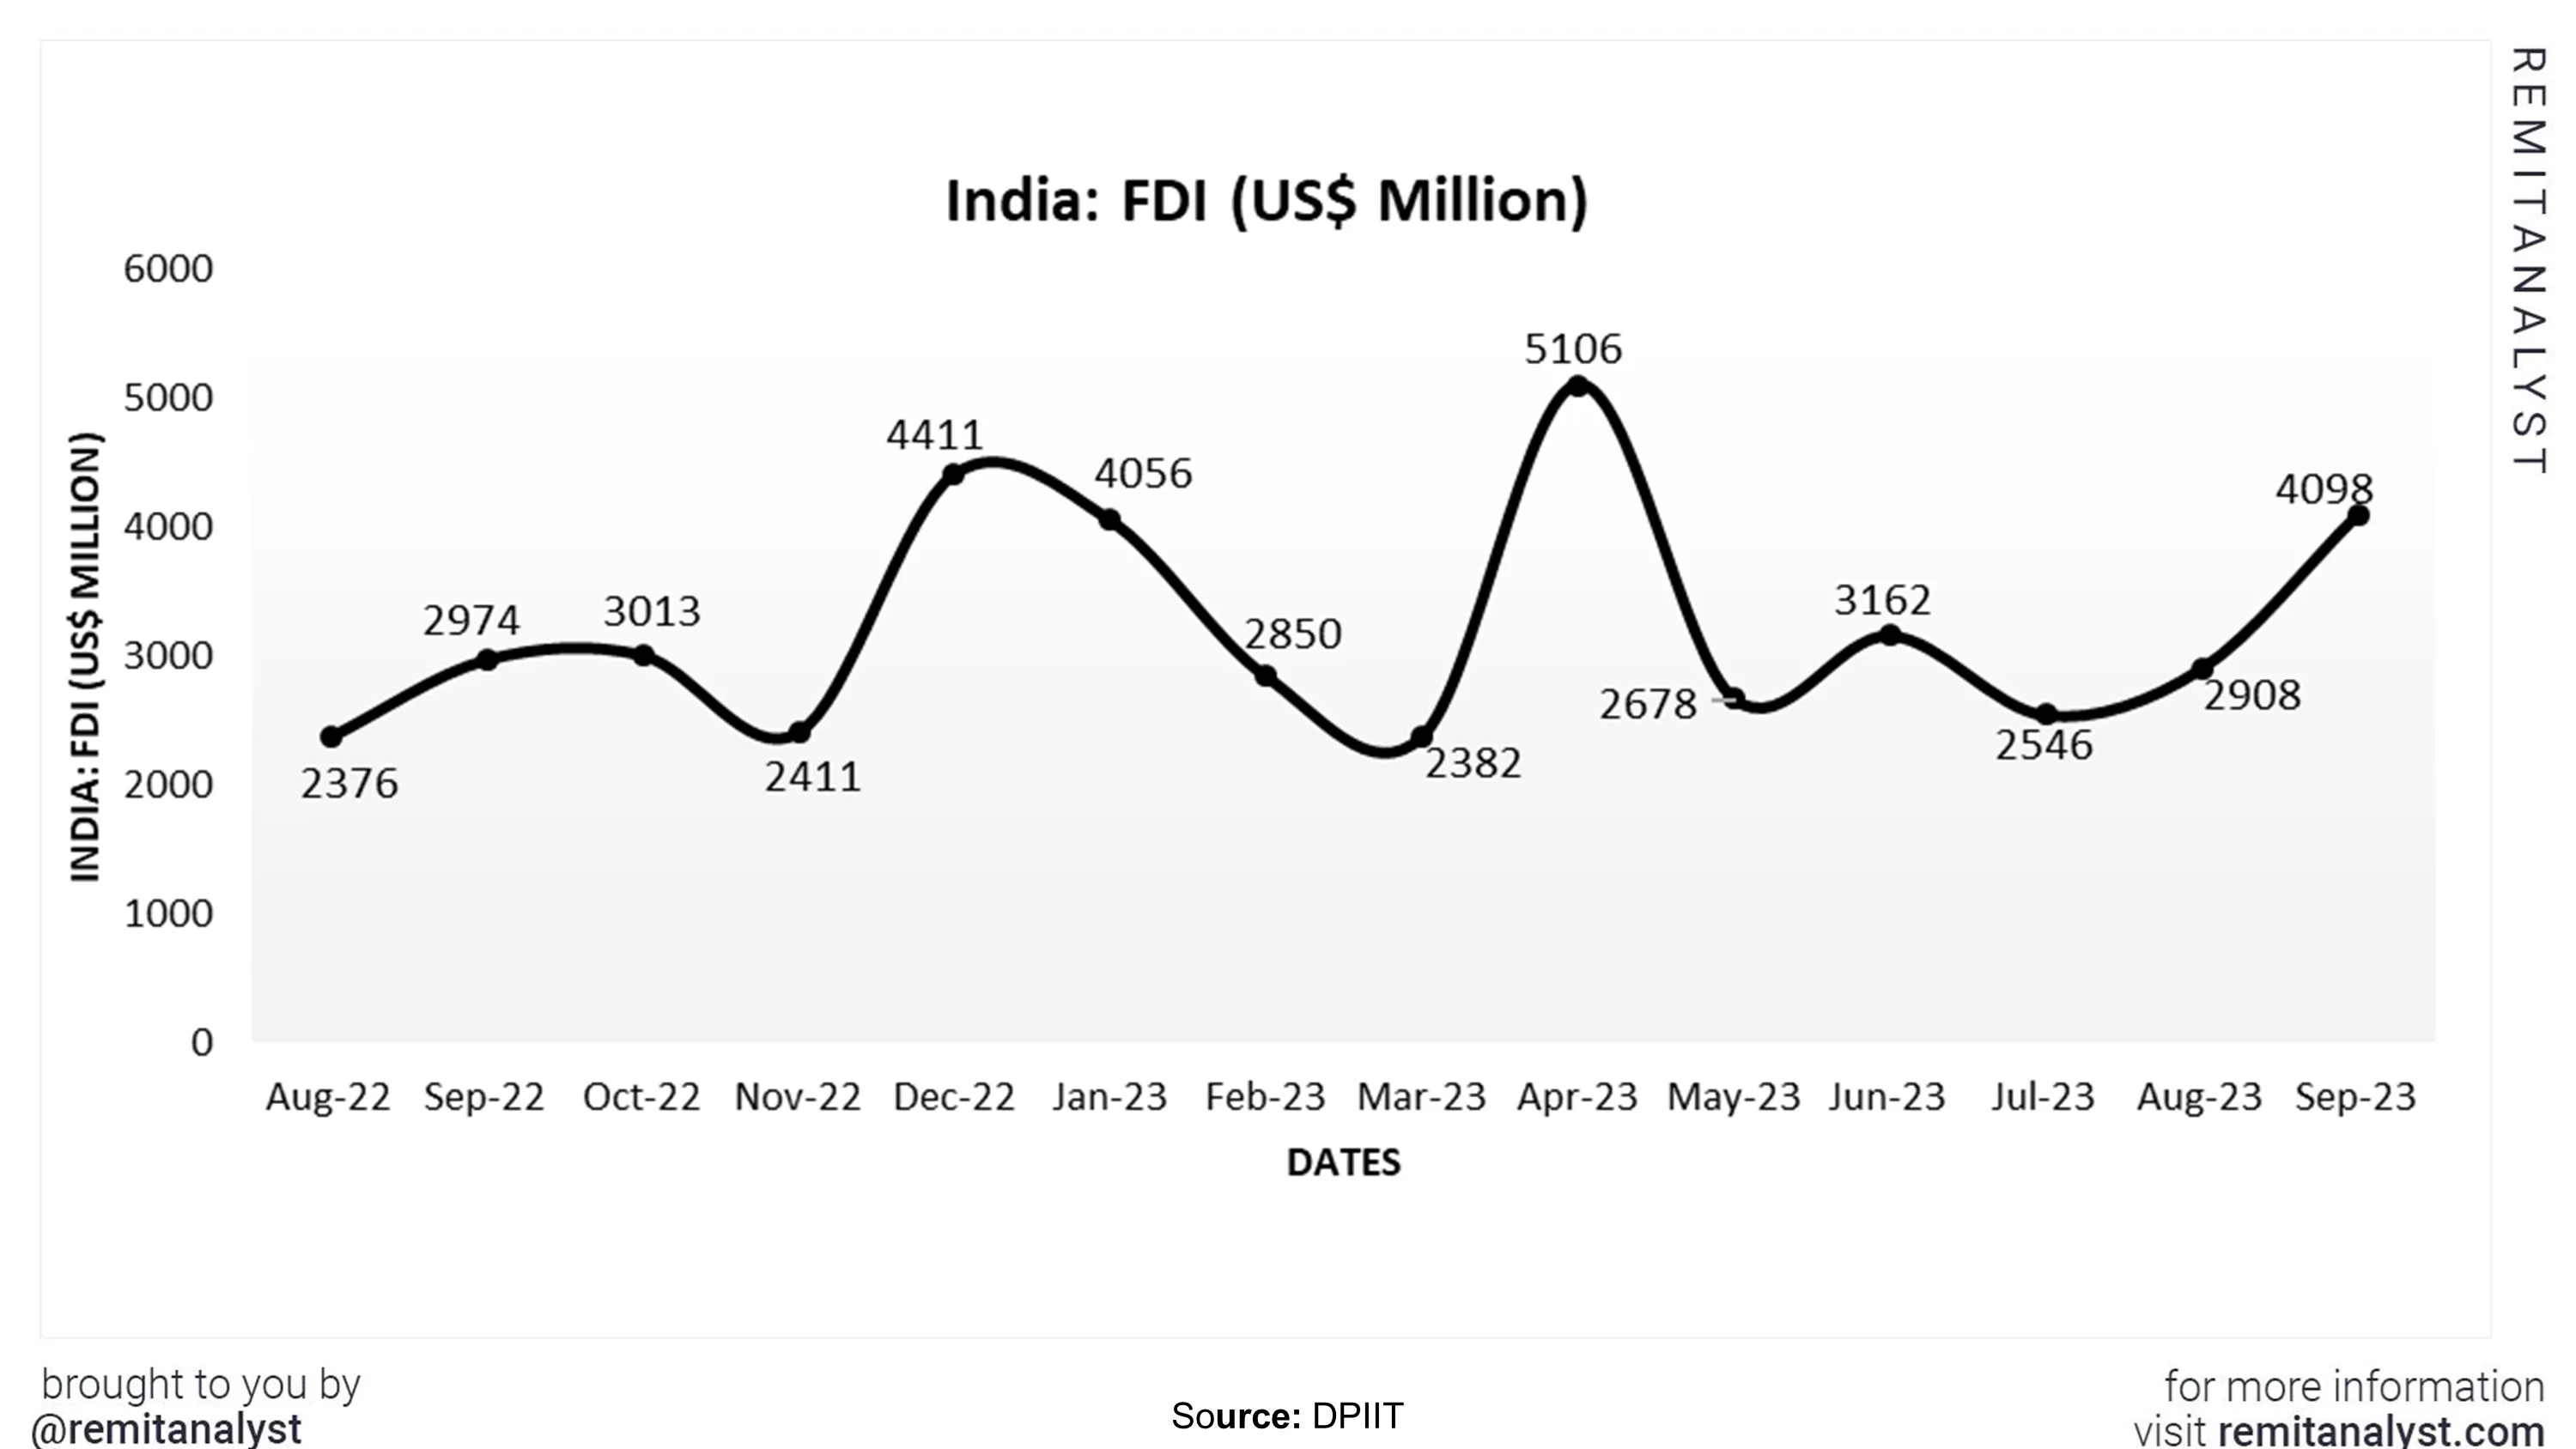 fdi-in-india-from-aug-2022-to-sep-2023